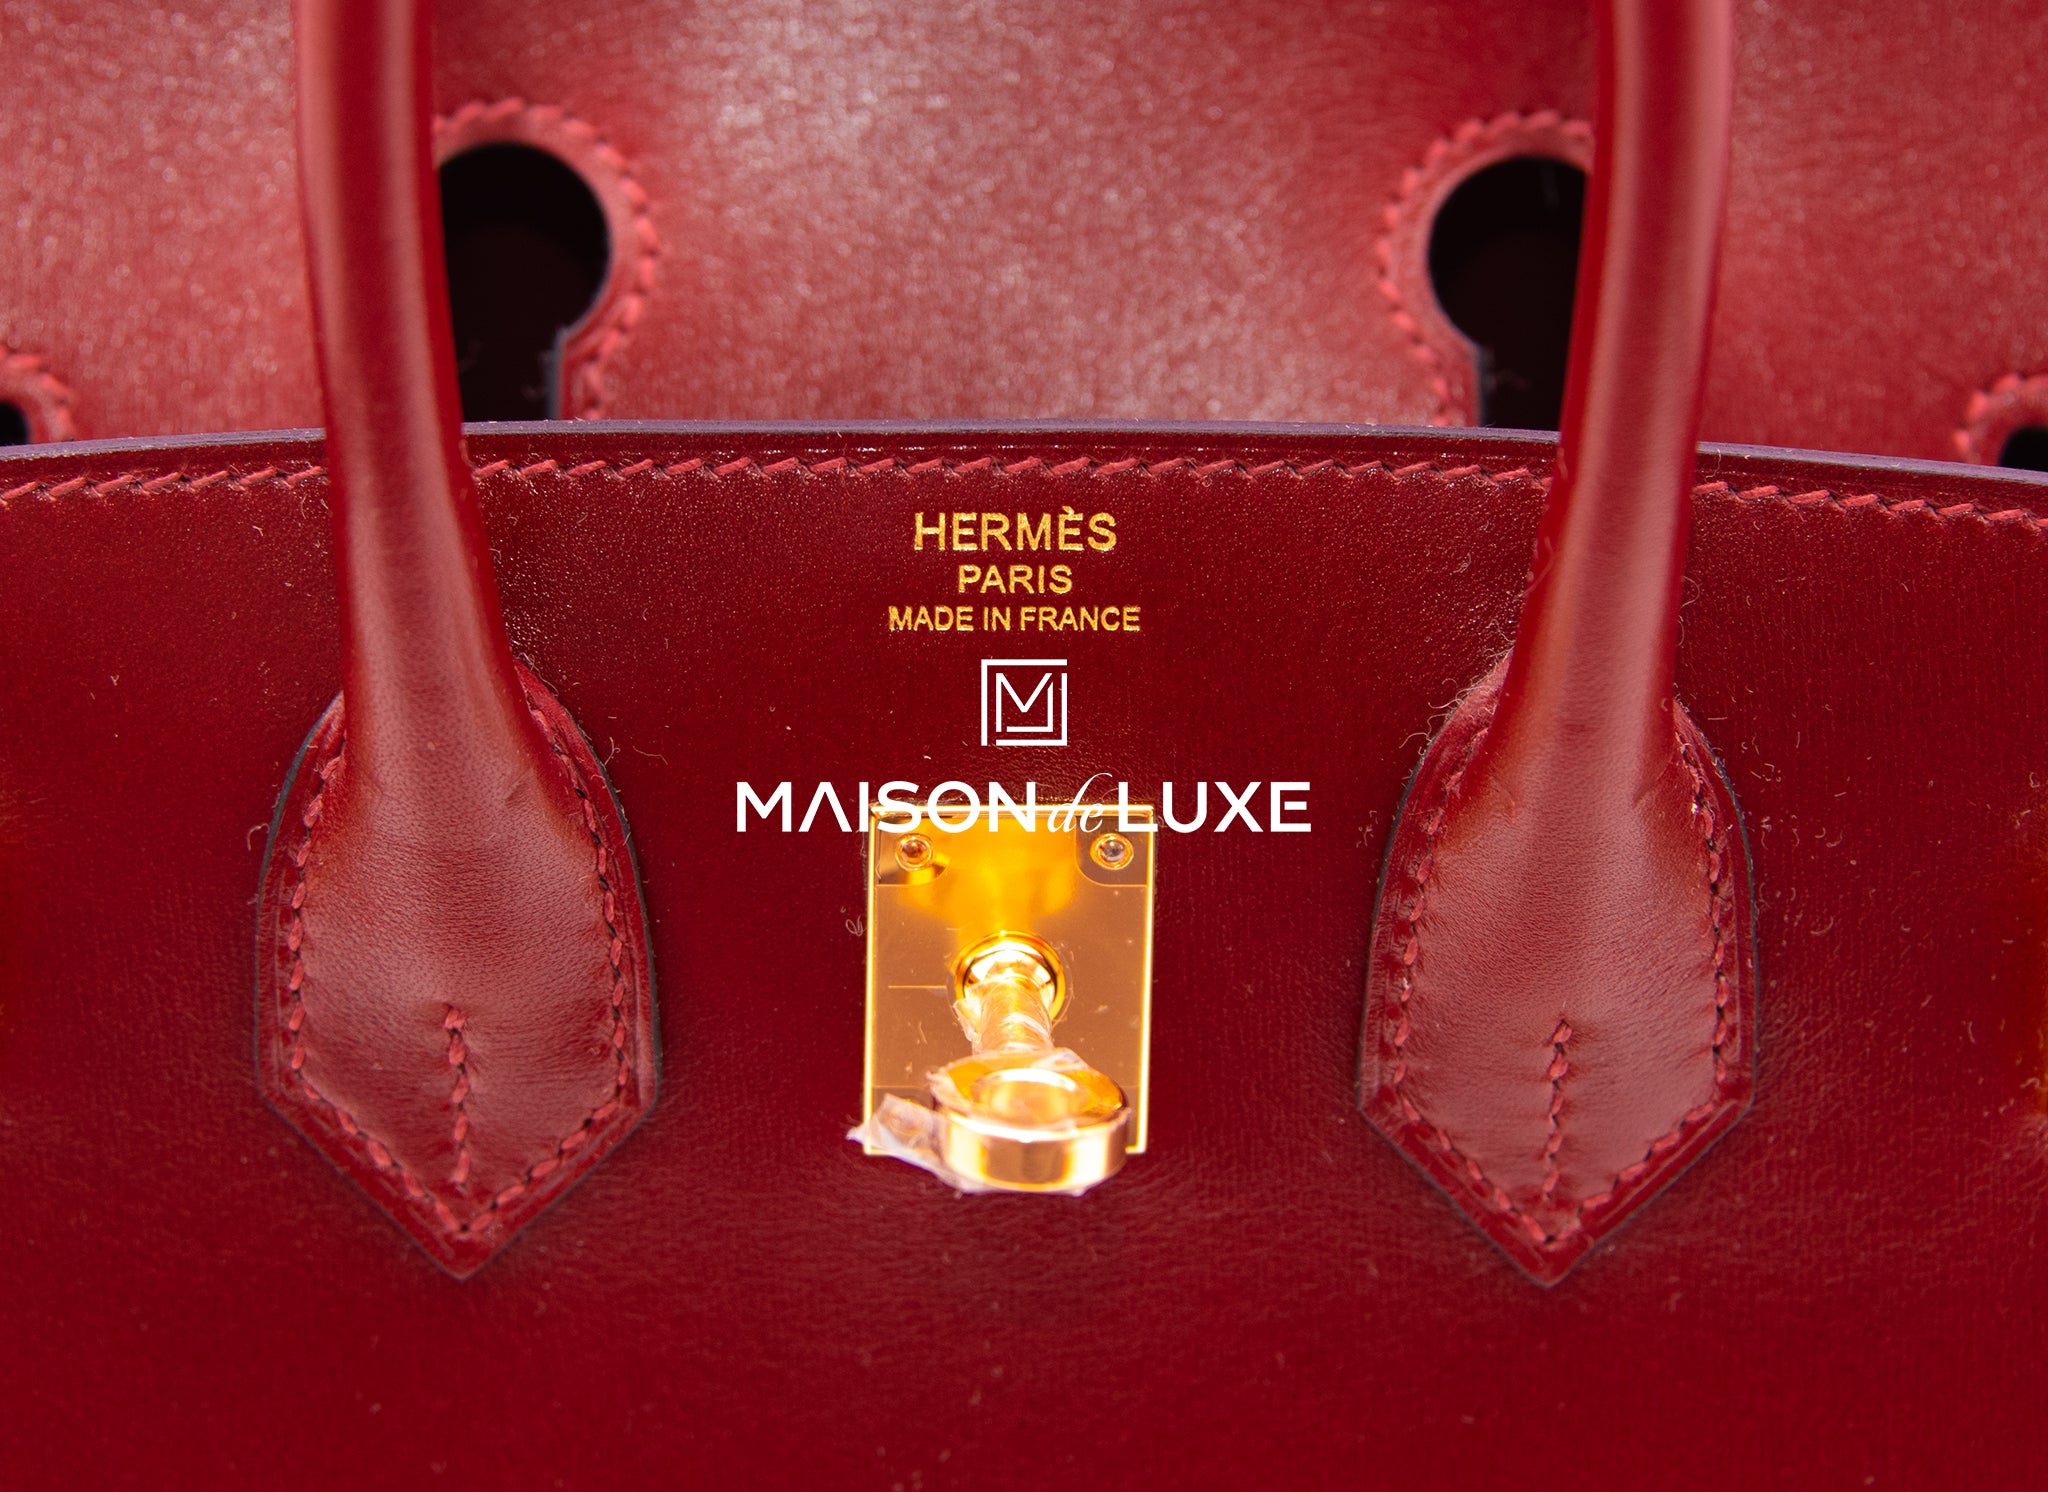 A PERSONALIZED ROUGE H CALF BOX LEATHER HAC BIRKIN 60 WITH GOLD HARDWARE